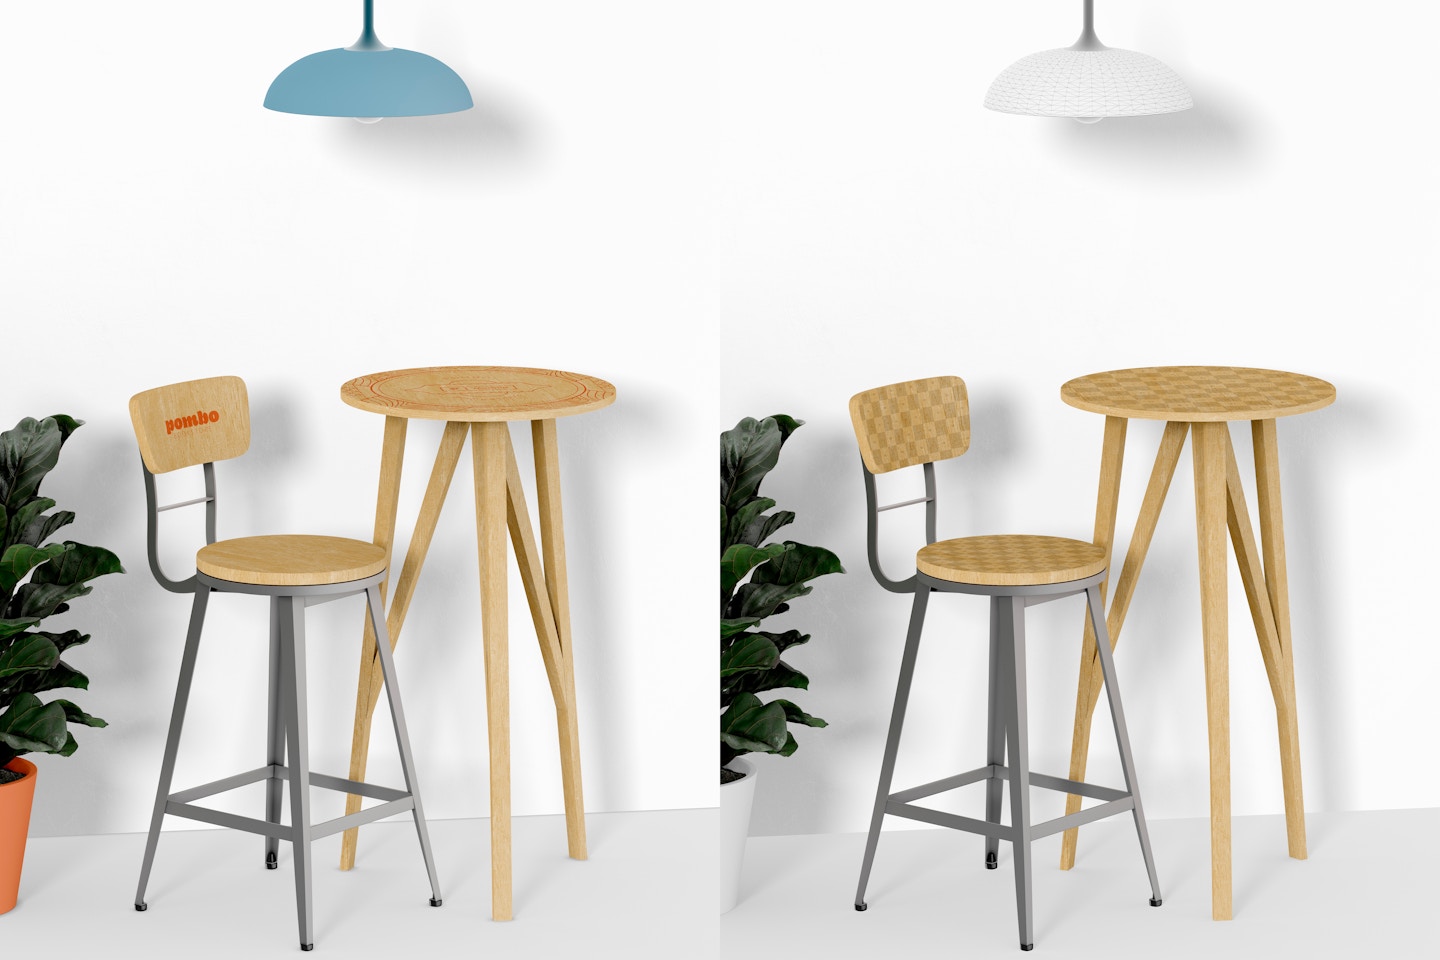 Long Wooden Table Mockup, with Stool